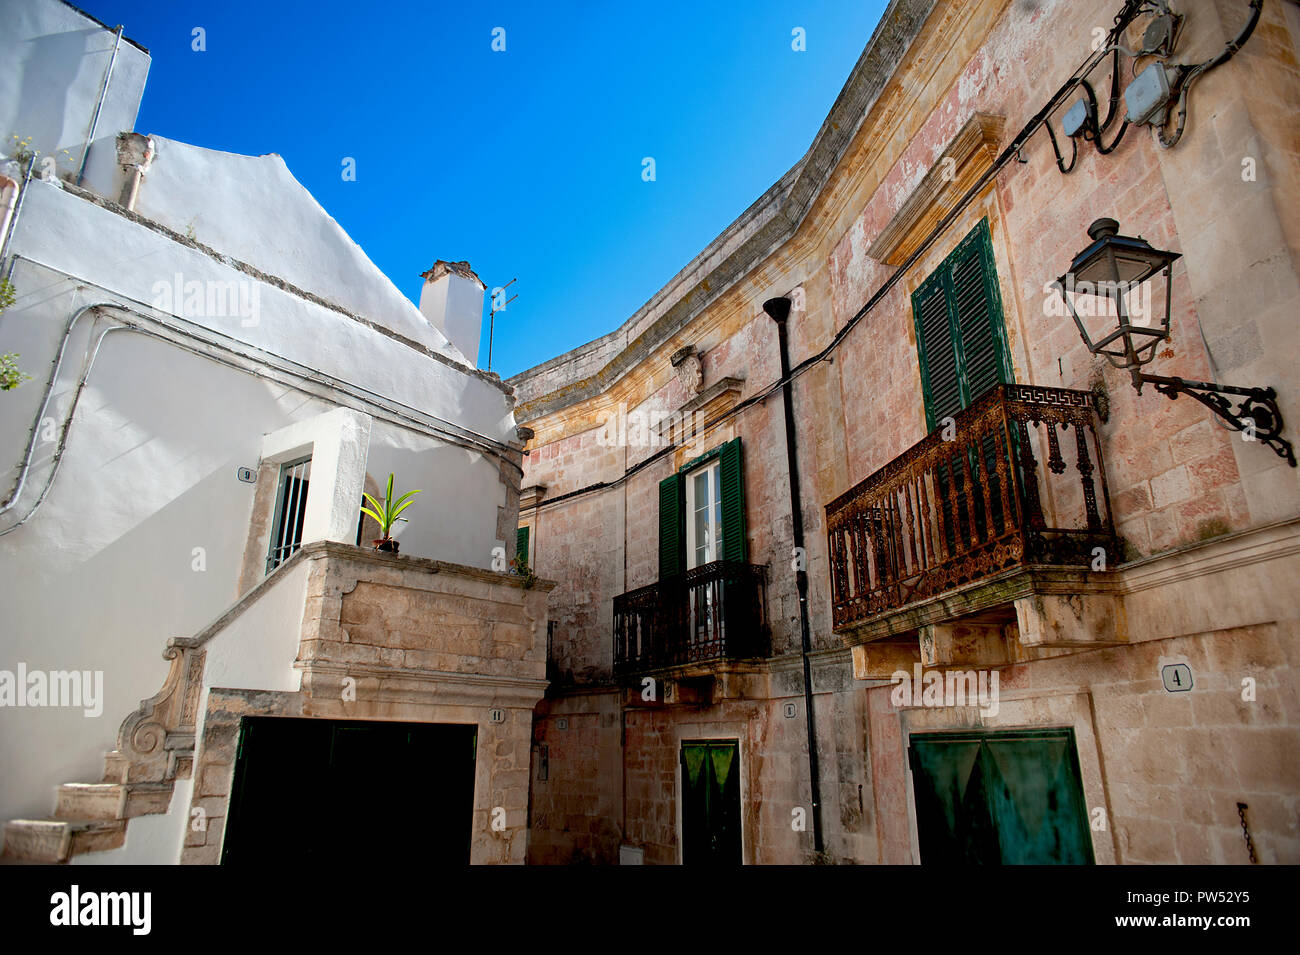 Stone and whitewashed houses with rusty balconies and green wooden shutters in the old quarter of Ceglie in Puglia, southern Italy. Stock Photo